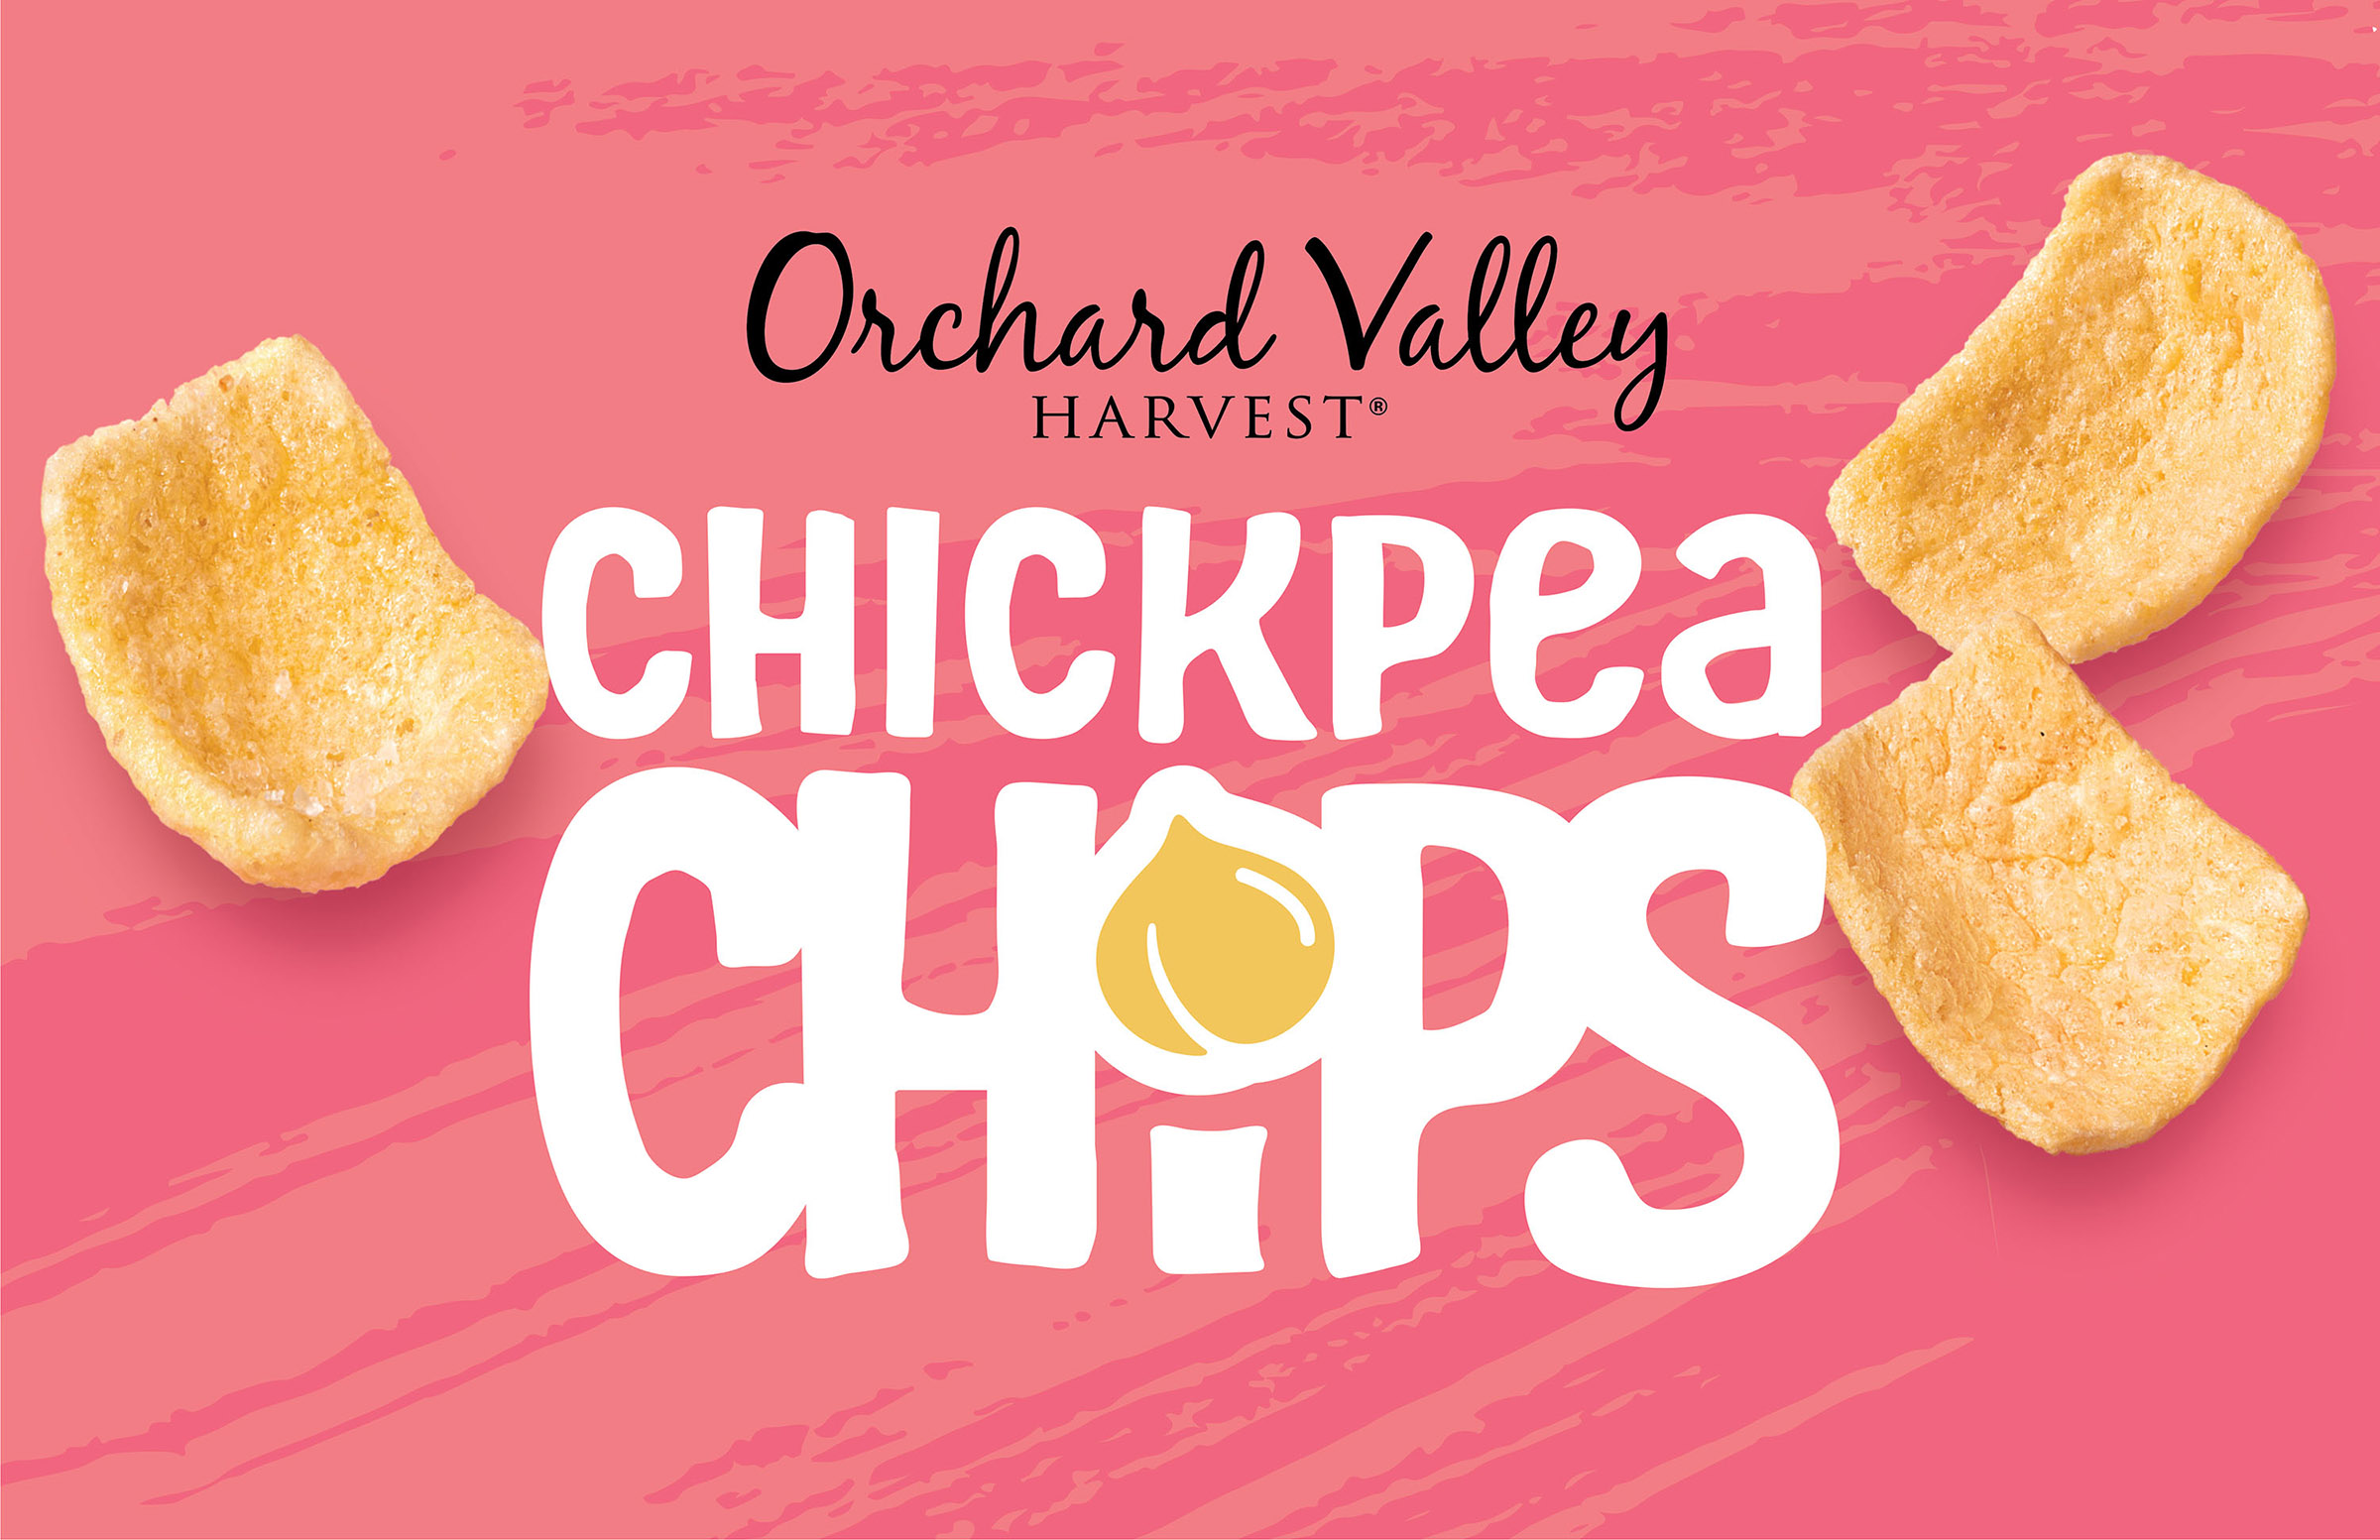 Orchard Valley Harvest Chickpea Chips